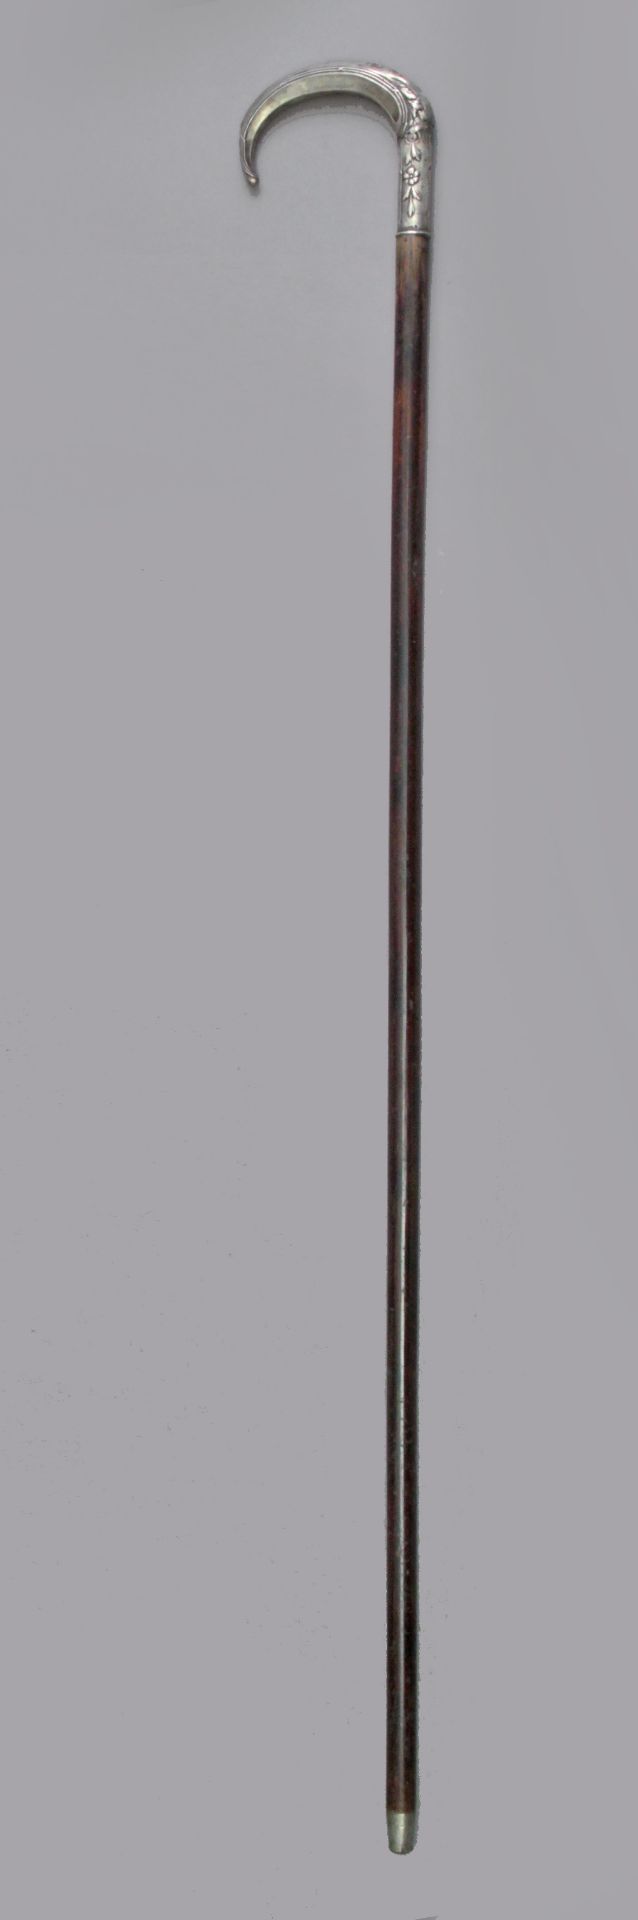 A 19th century walking stick. - Image 3 of 3